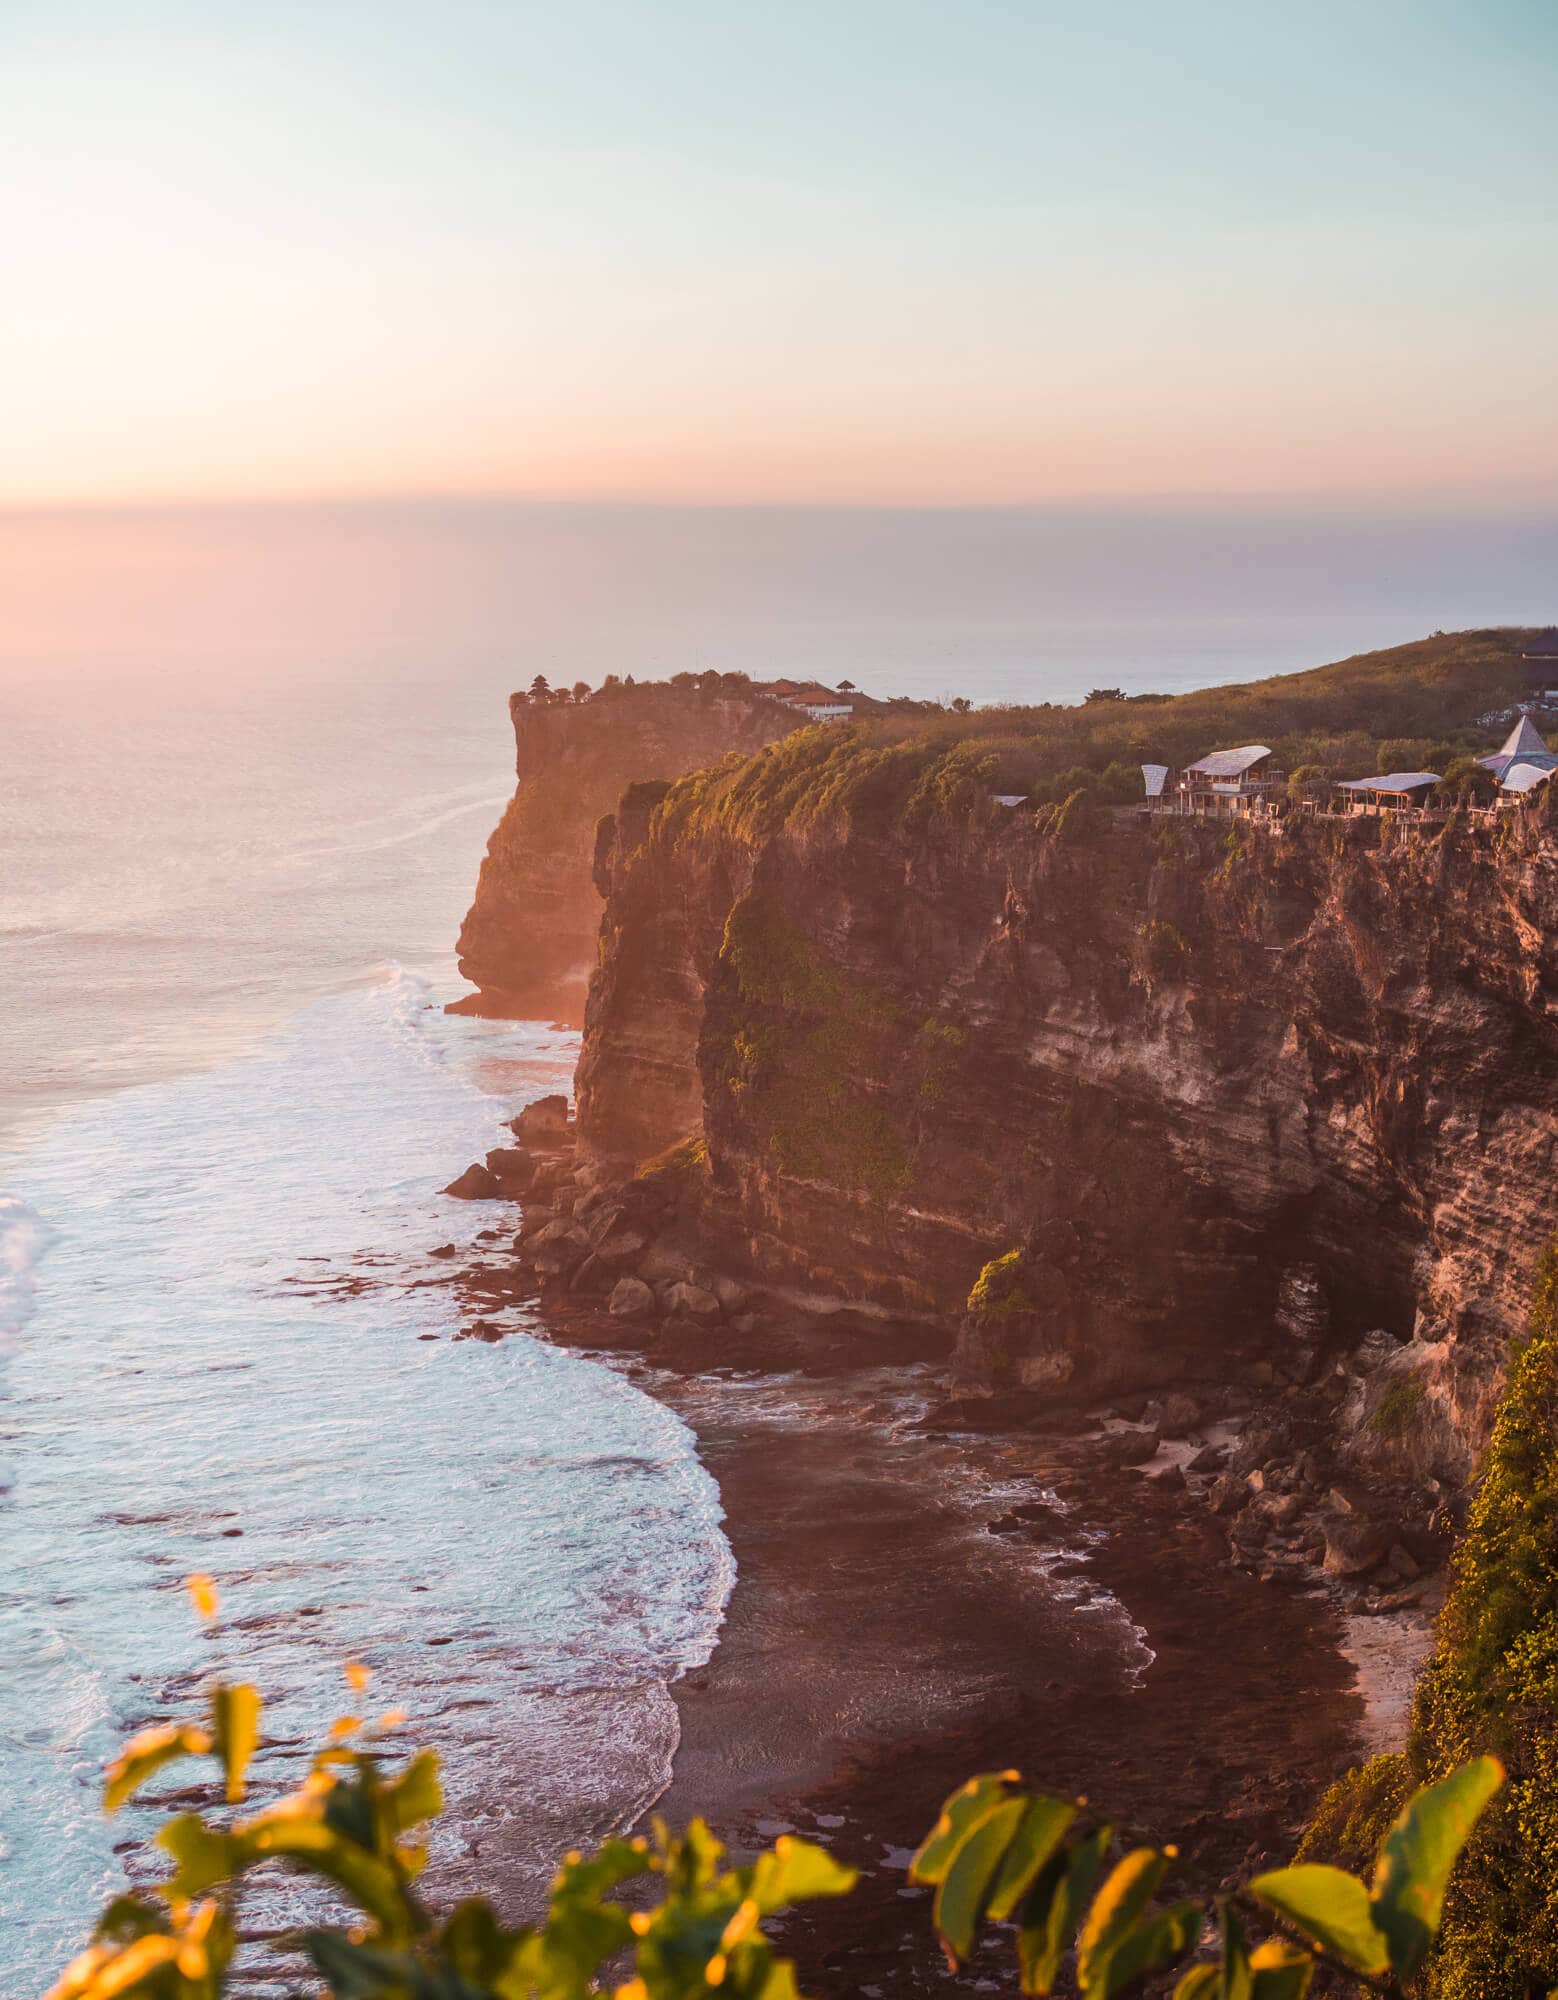 View of the Uluwatu Cliffs from Karang Boma Cliff viewpoint at sunset in Bali.